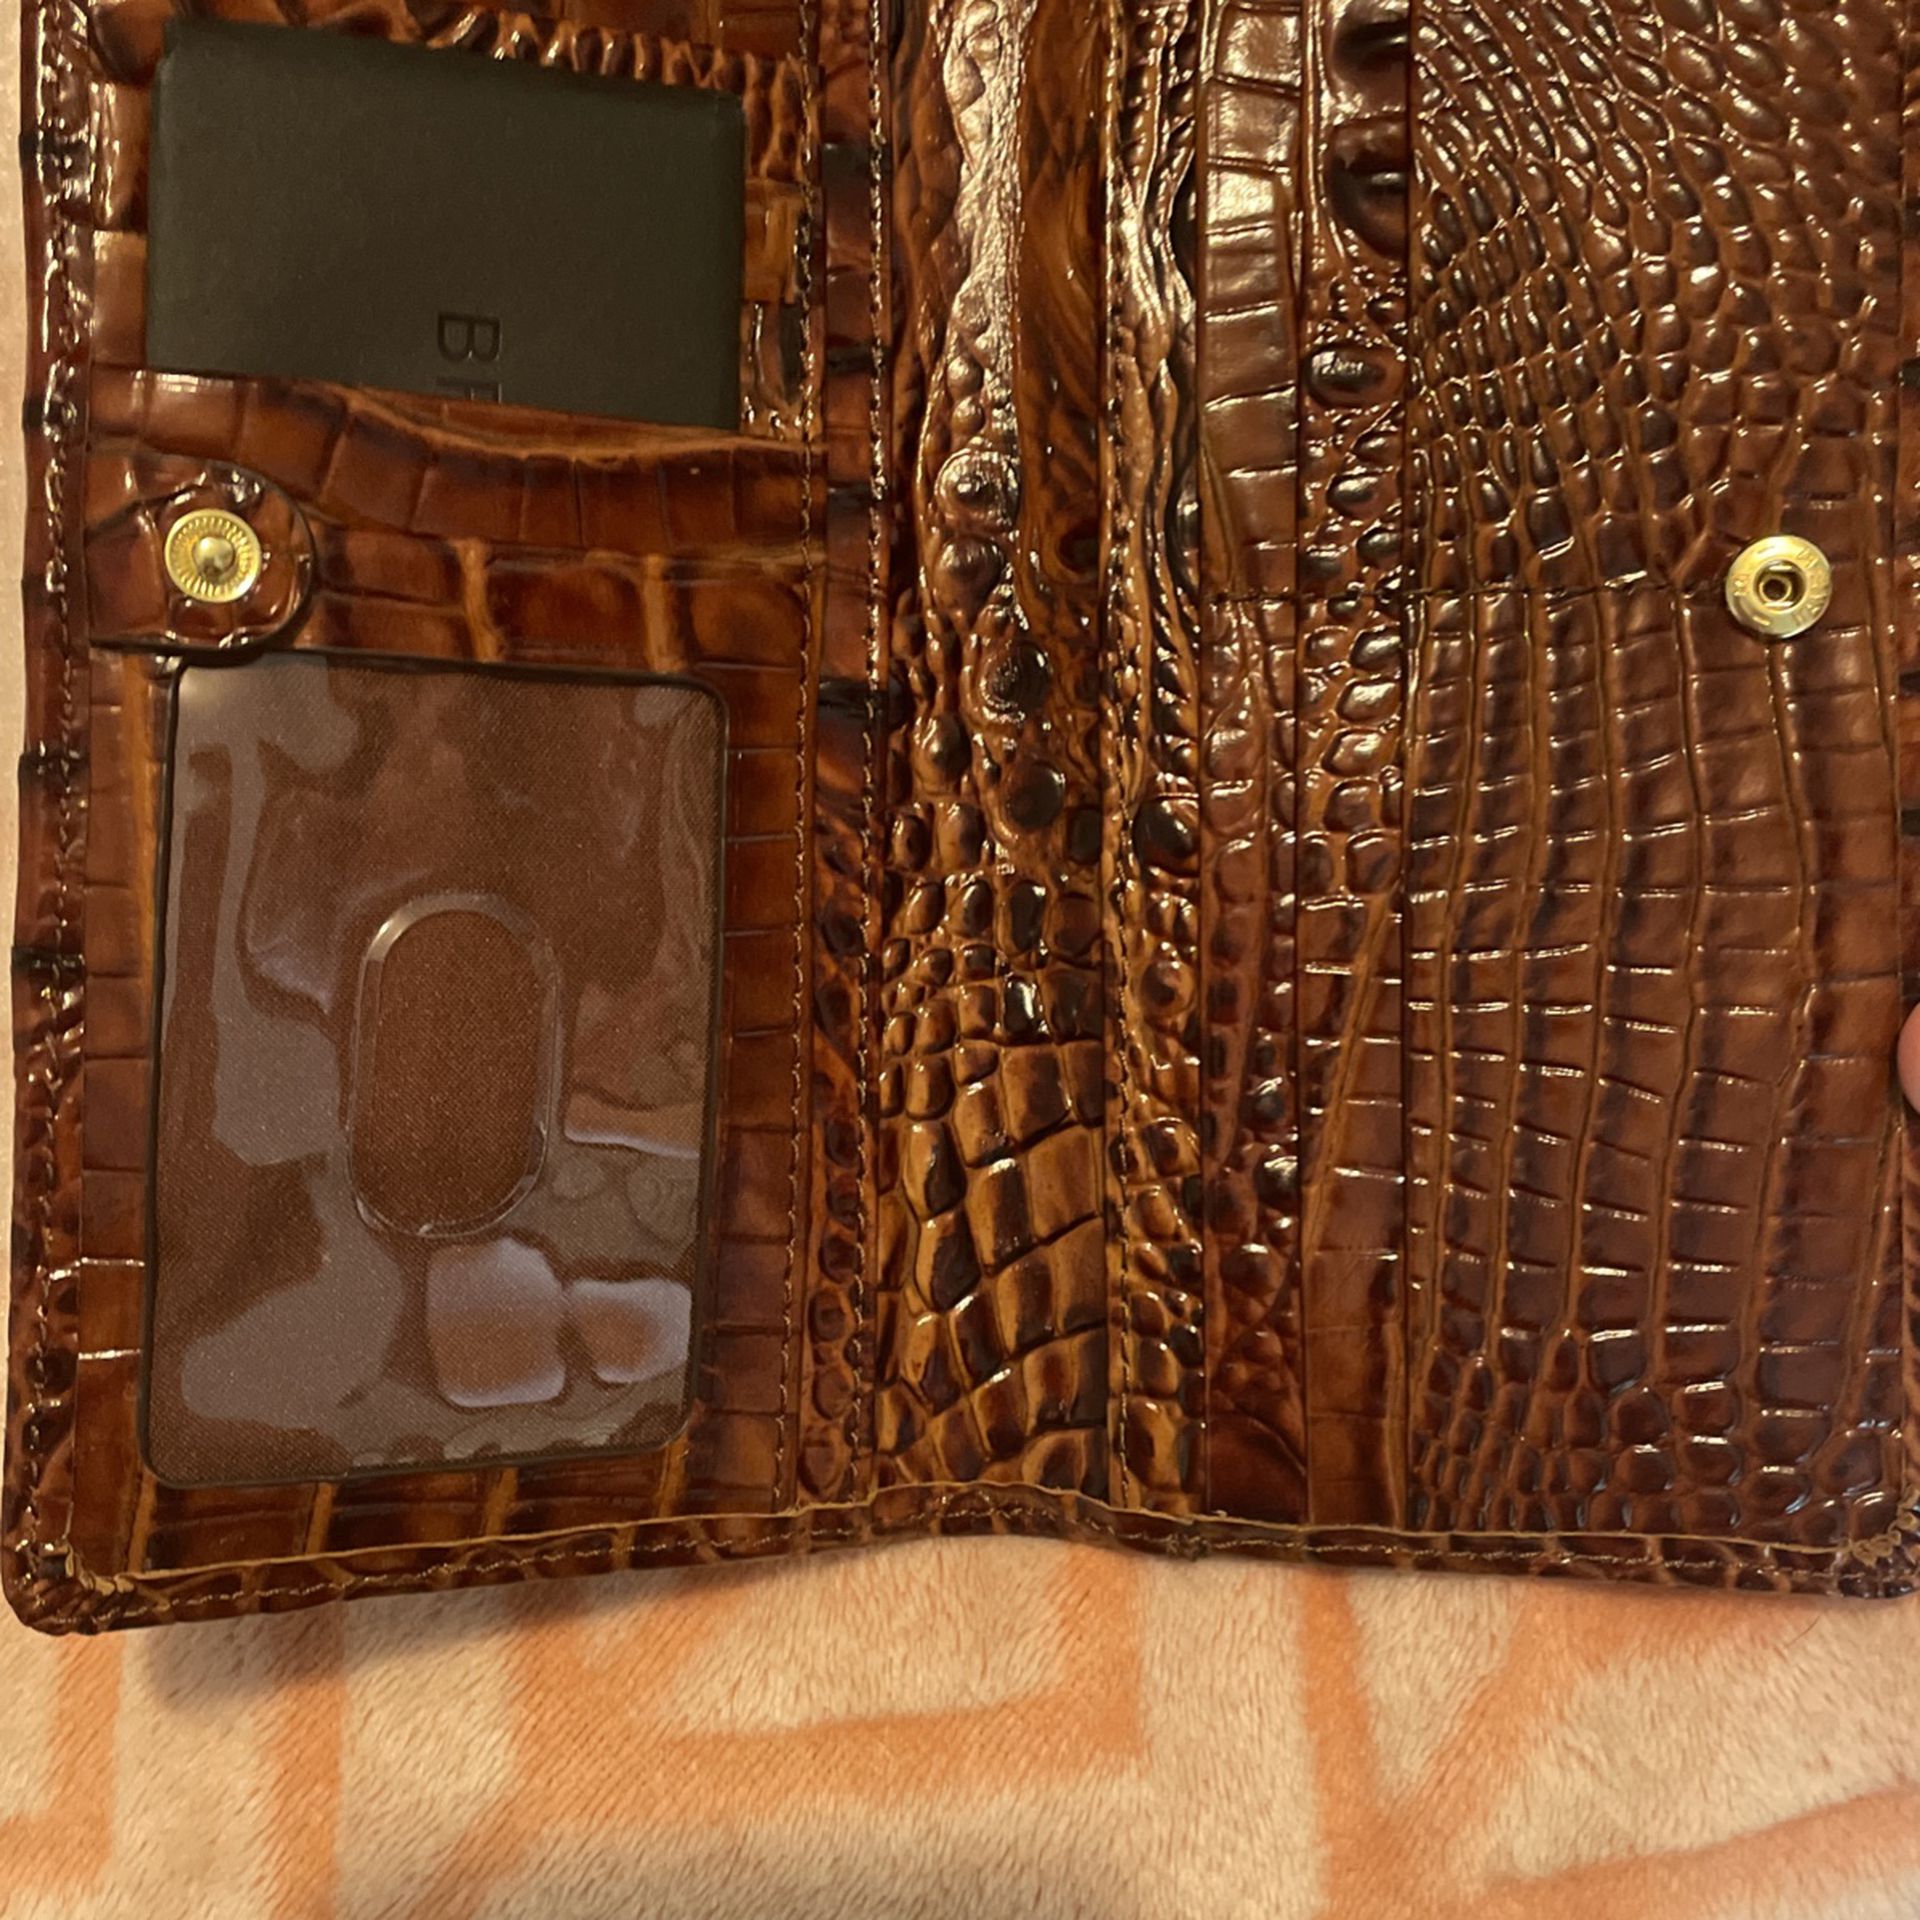 Brahmin Purse And wallet, Brand New!! for Sale in Gibsonton, FL